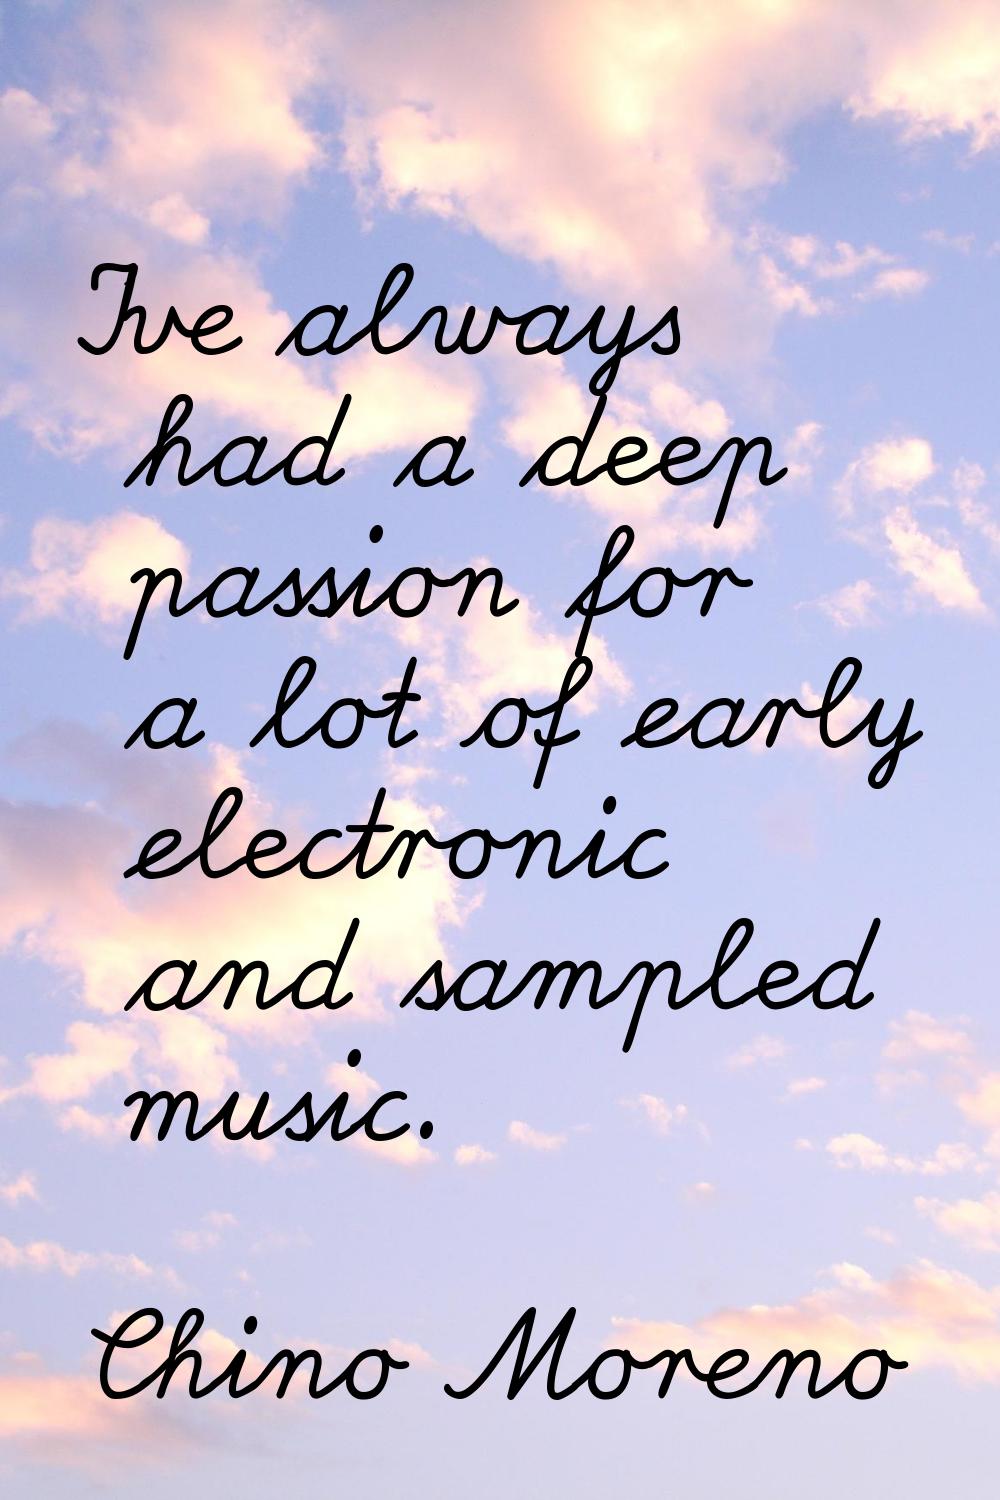 I've always had a deep passion for a lot of early electronic and sampled music.